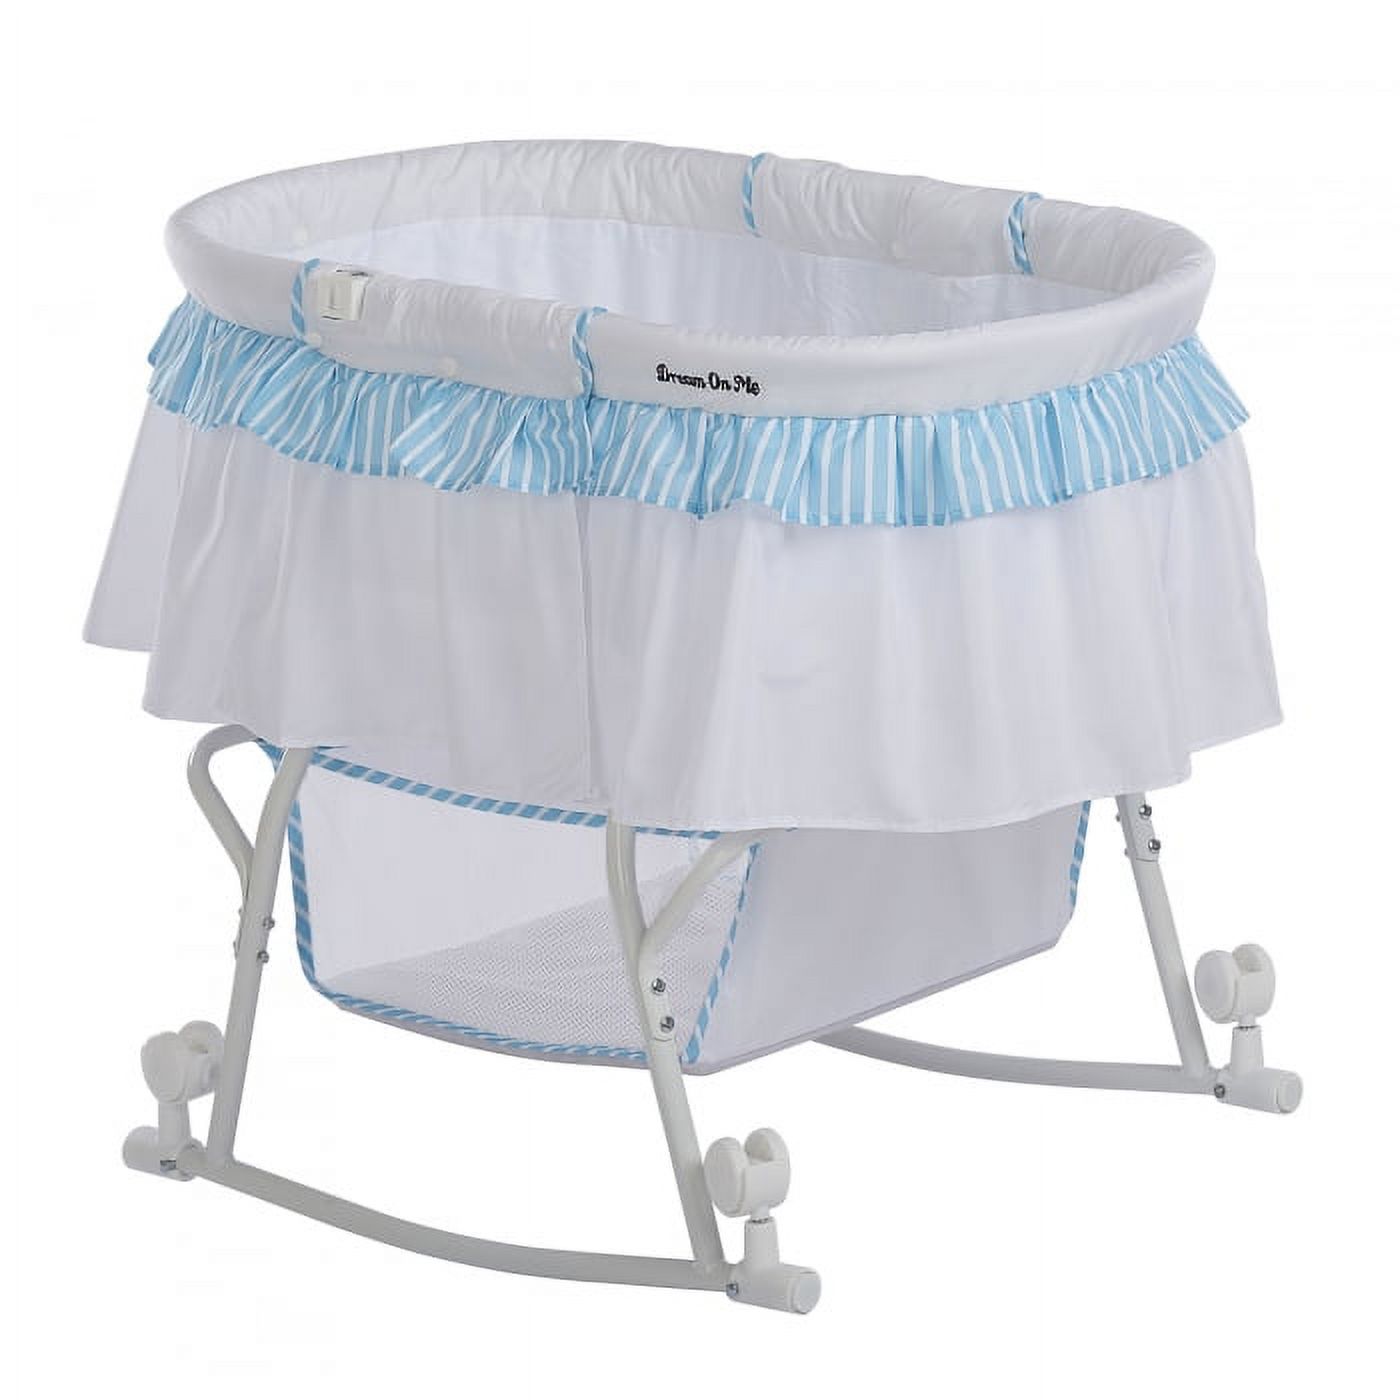 Dream On Me Lacy Portable 2-in-1 Bassinet & Cradle in Blue and White, Lightweight Baby Bassinet - image 2 of 6